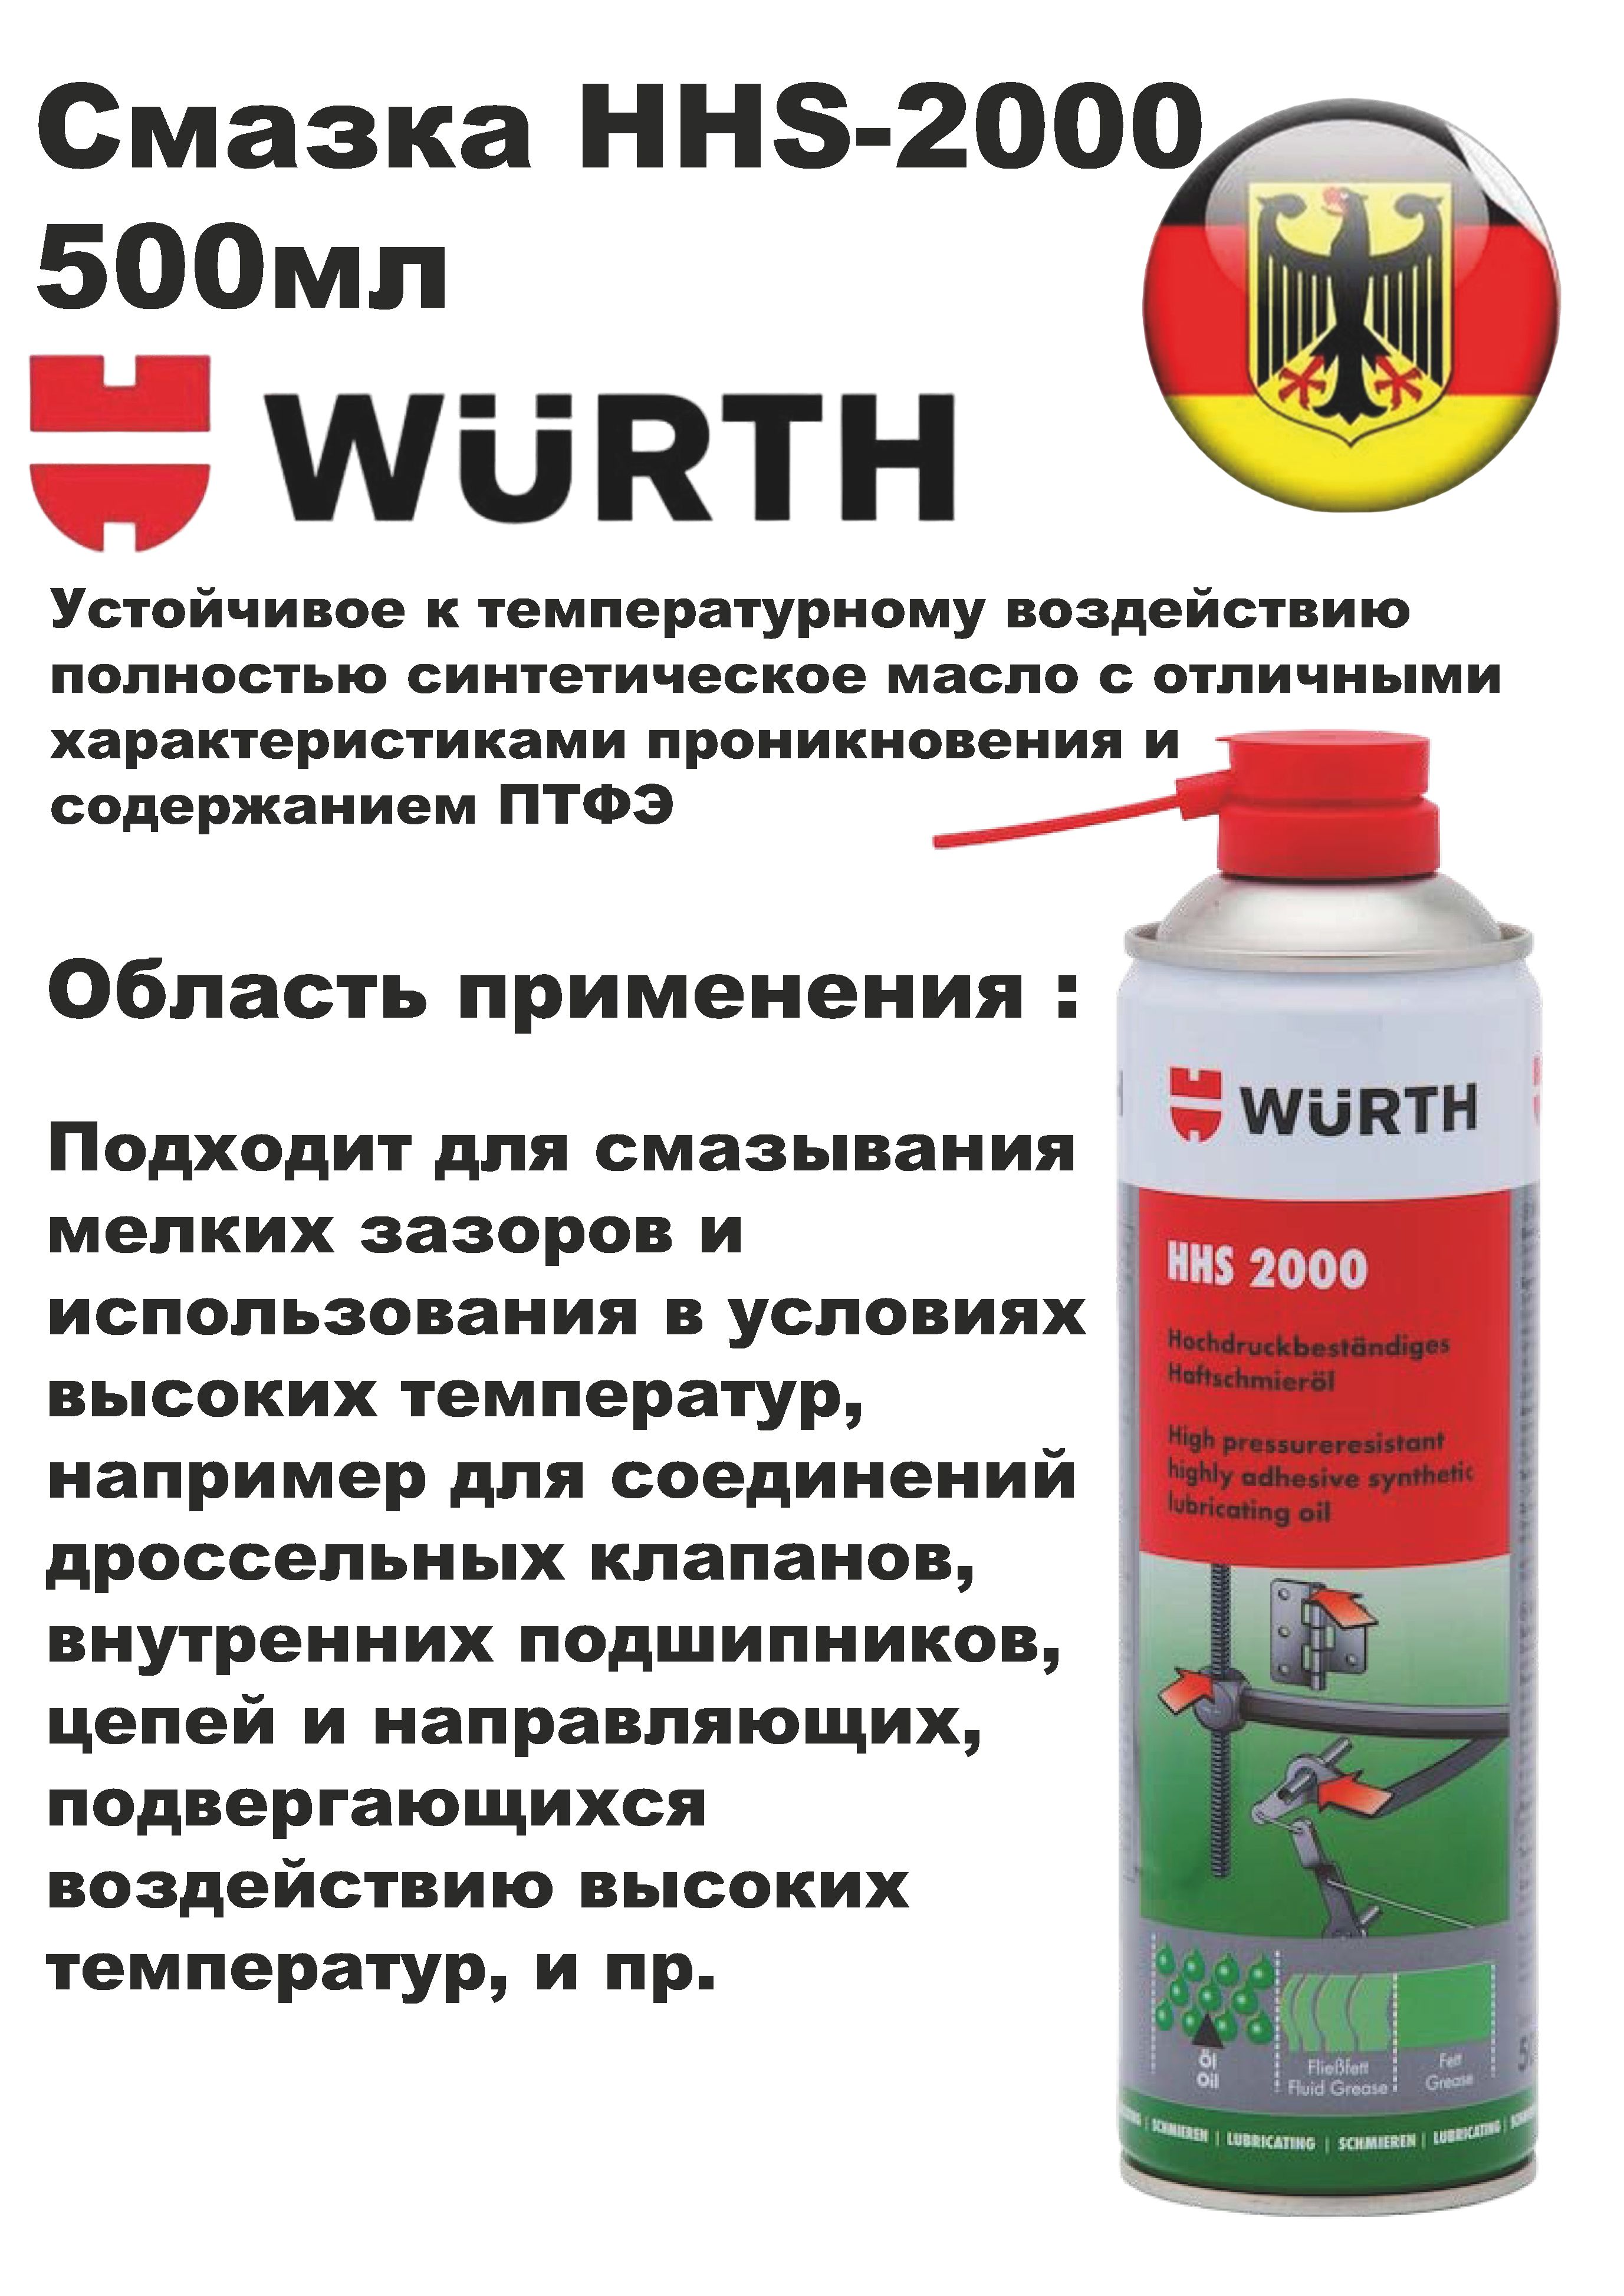 Wurth hhs 2000. Смазка Вюрт HHS 2000. Wurth смазка HHS 500. Смазка HHS 500мл спрей Wurth 008931065. Wurth HHS 2000 аналоги смазки.